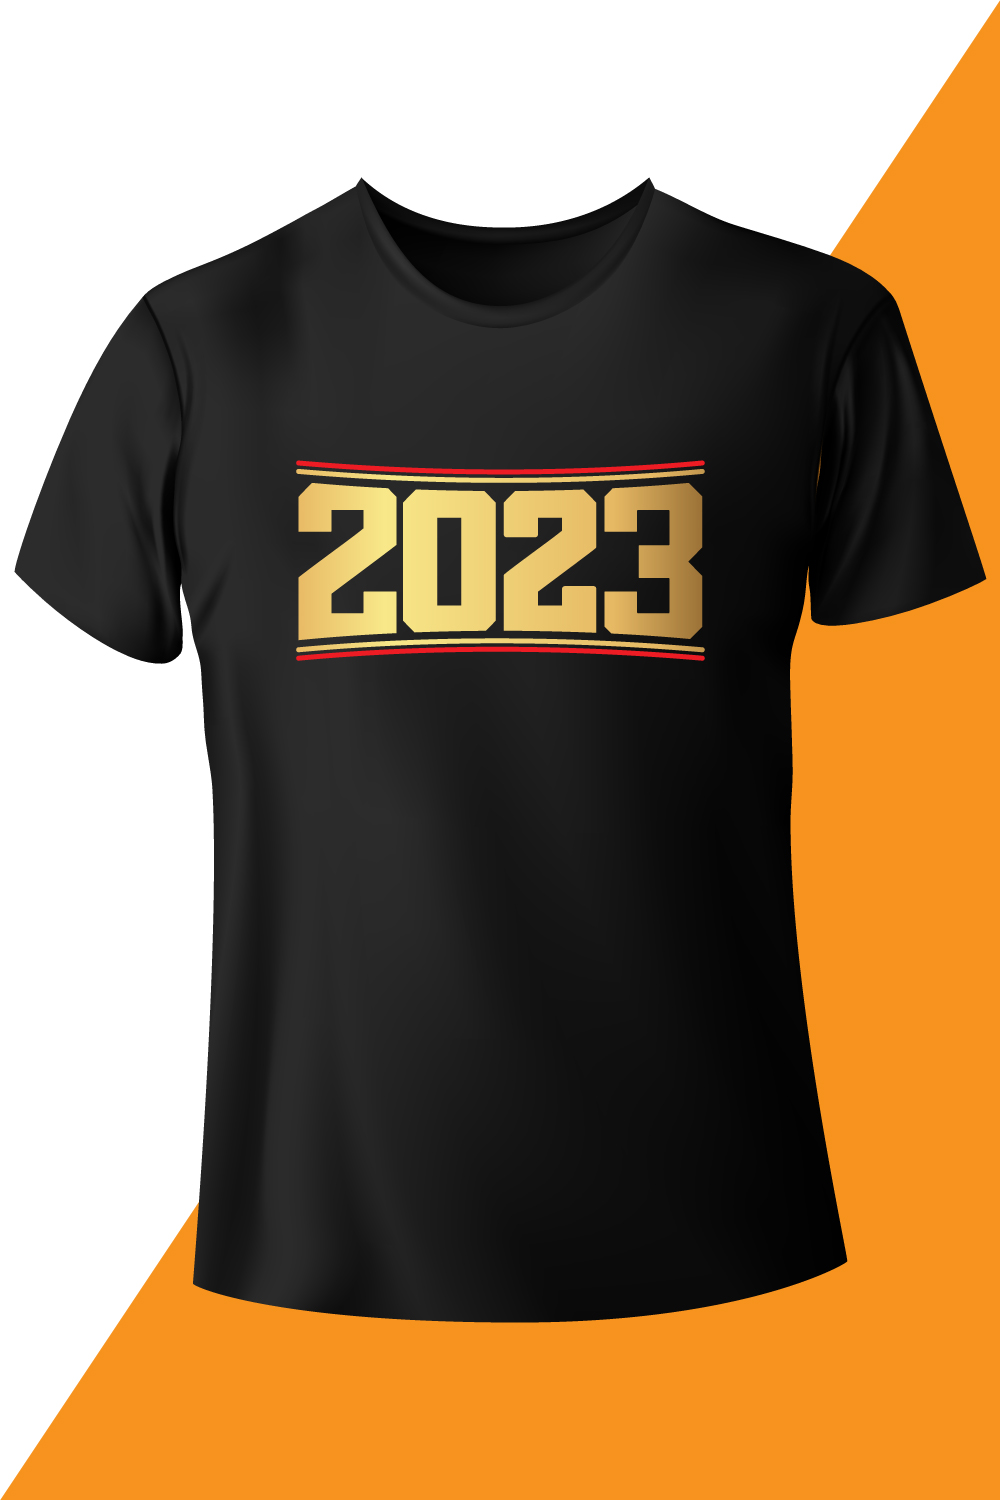 Image of black t-shirt with colorful print 2023.